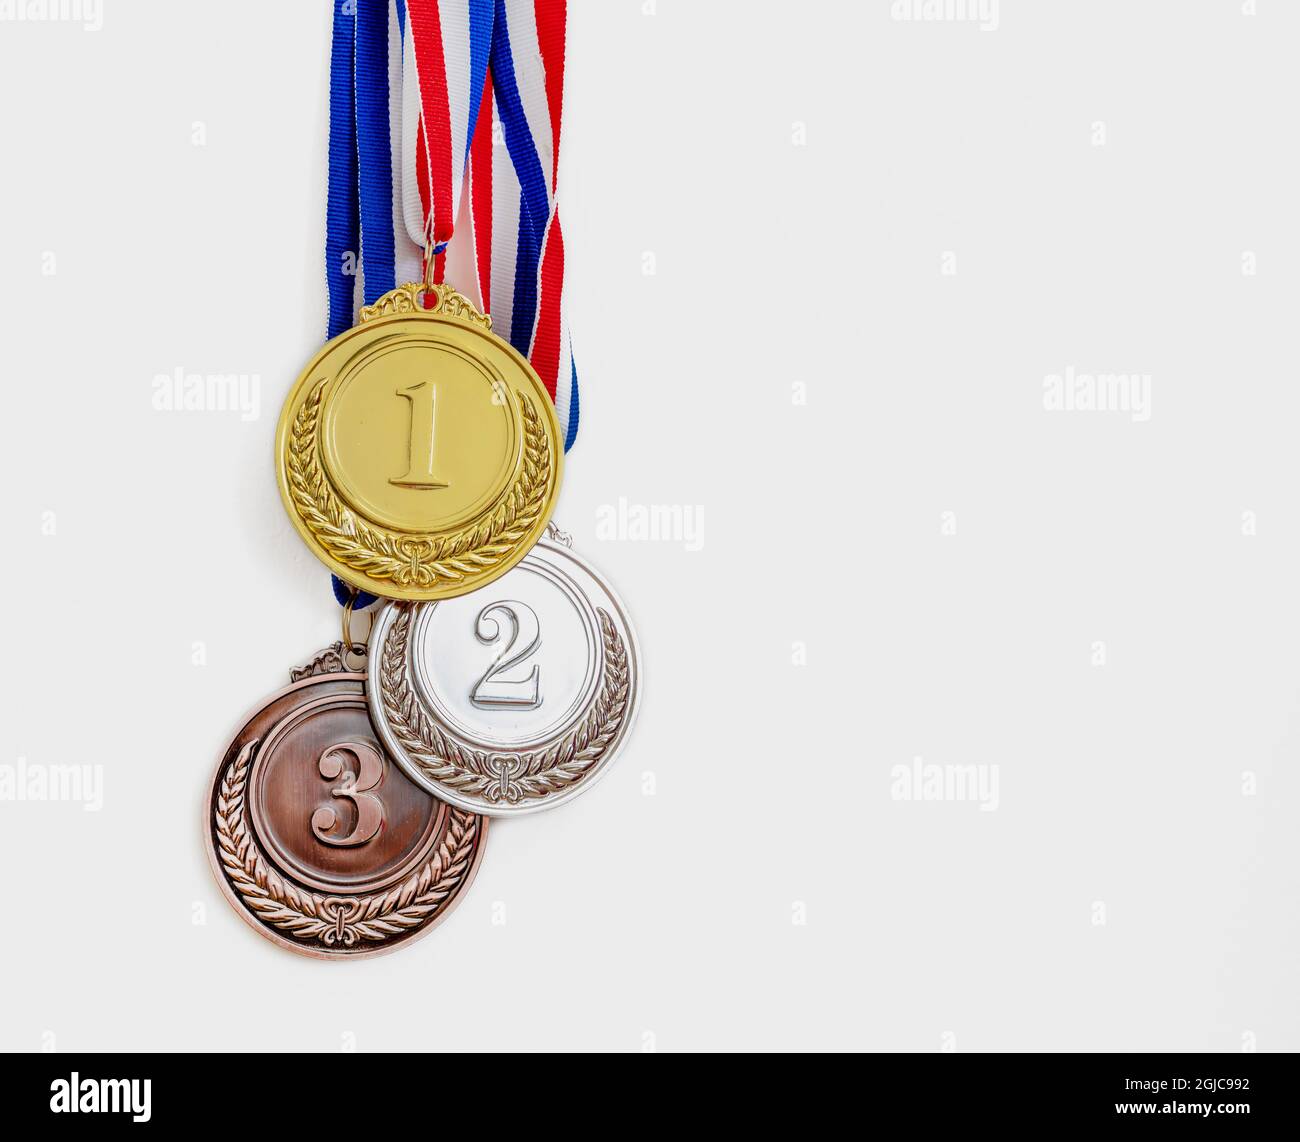 3PCS Metal Award Medals with Neck Ribbon Medal Gold Silver Bronze Trophy Prize 